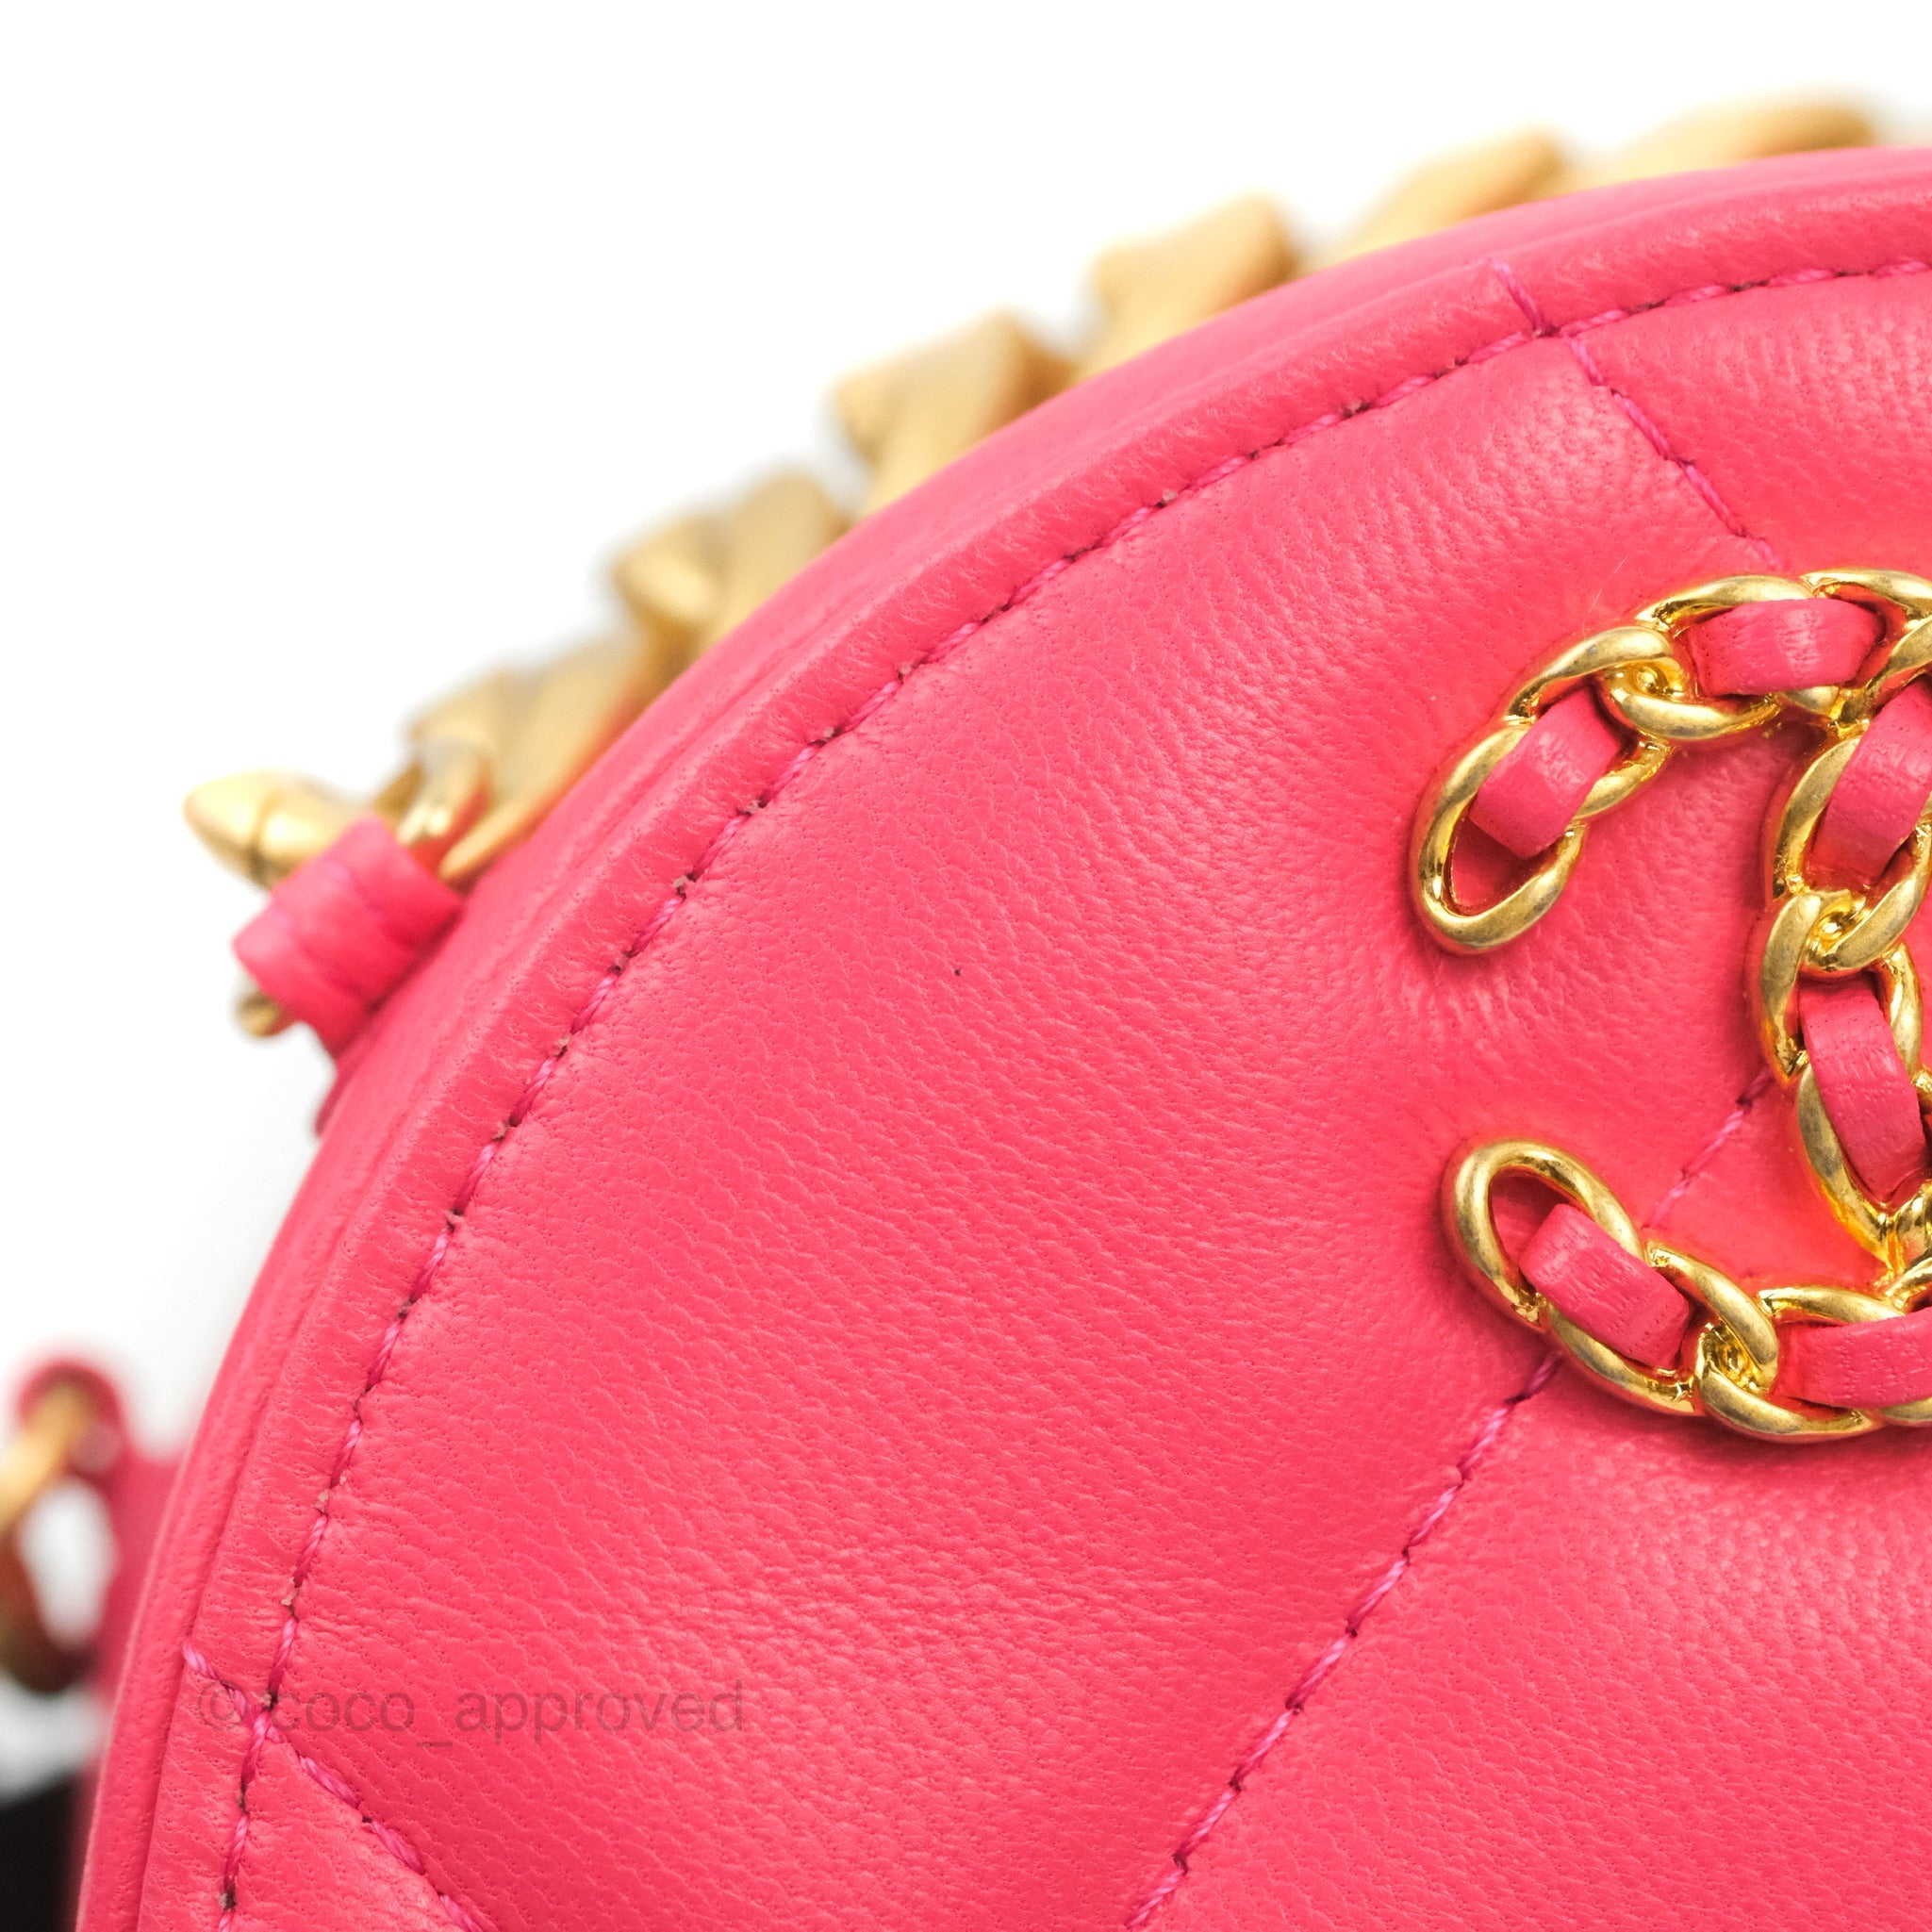 Chanel CHANEL 19 round clutch chain shoulder bag leather pink